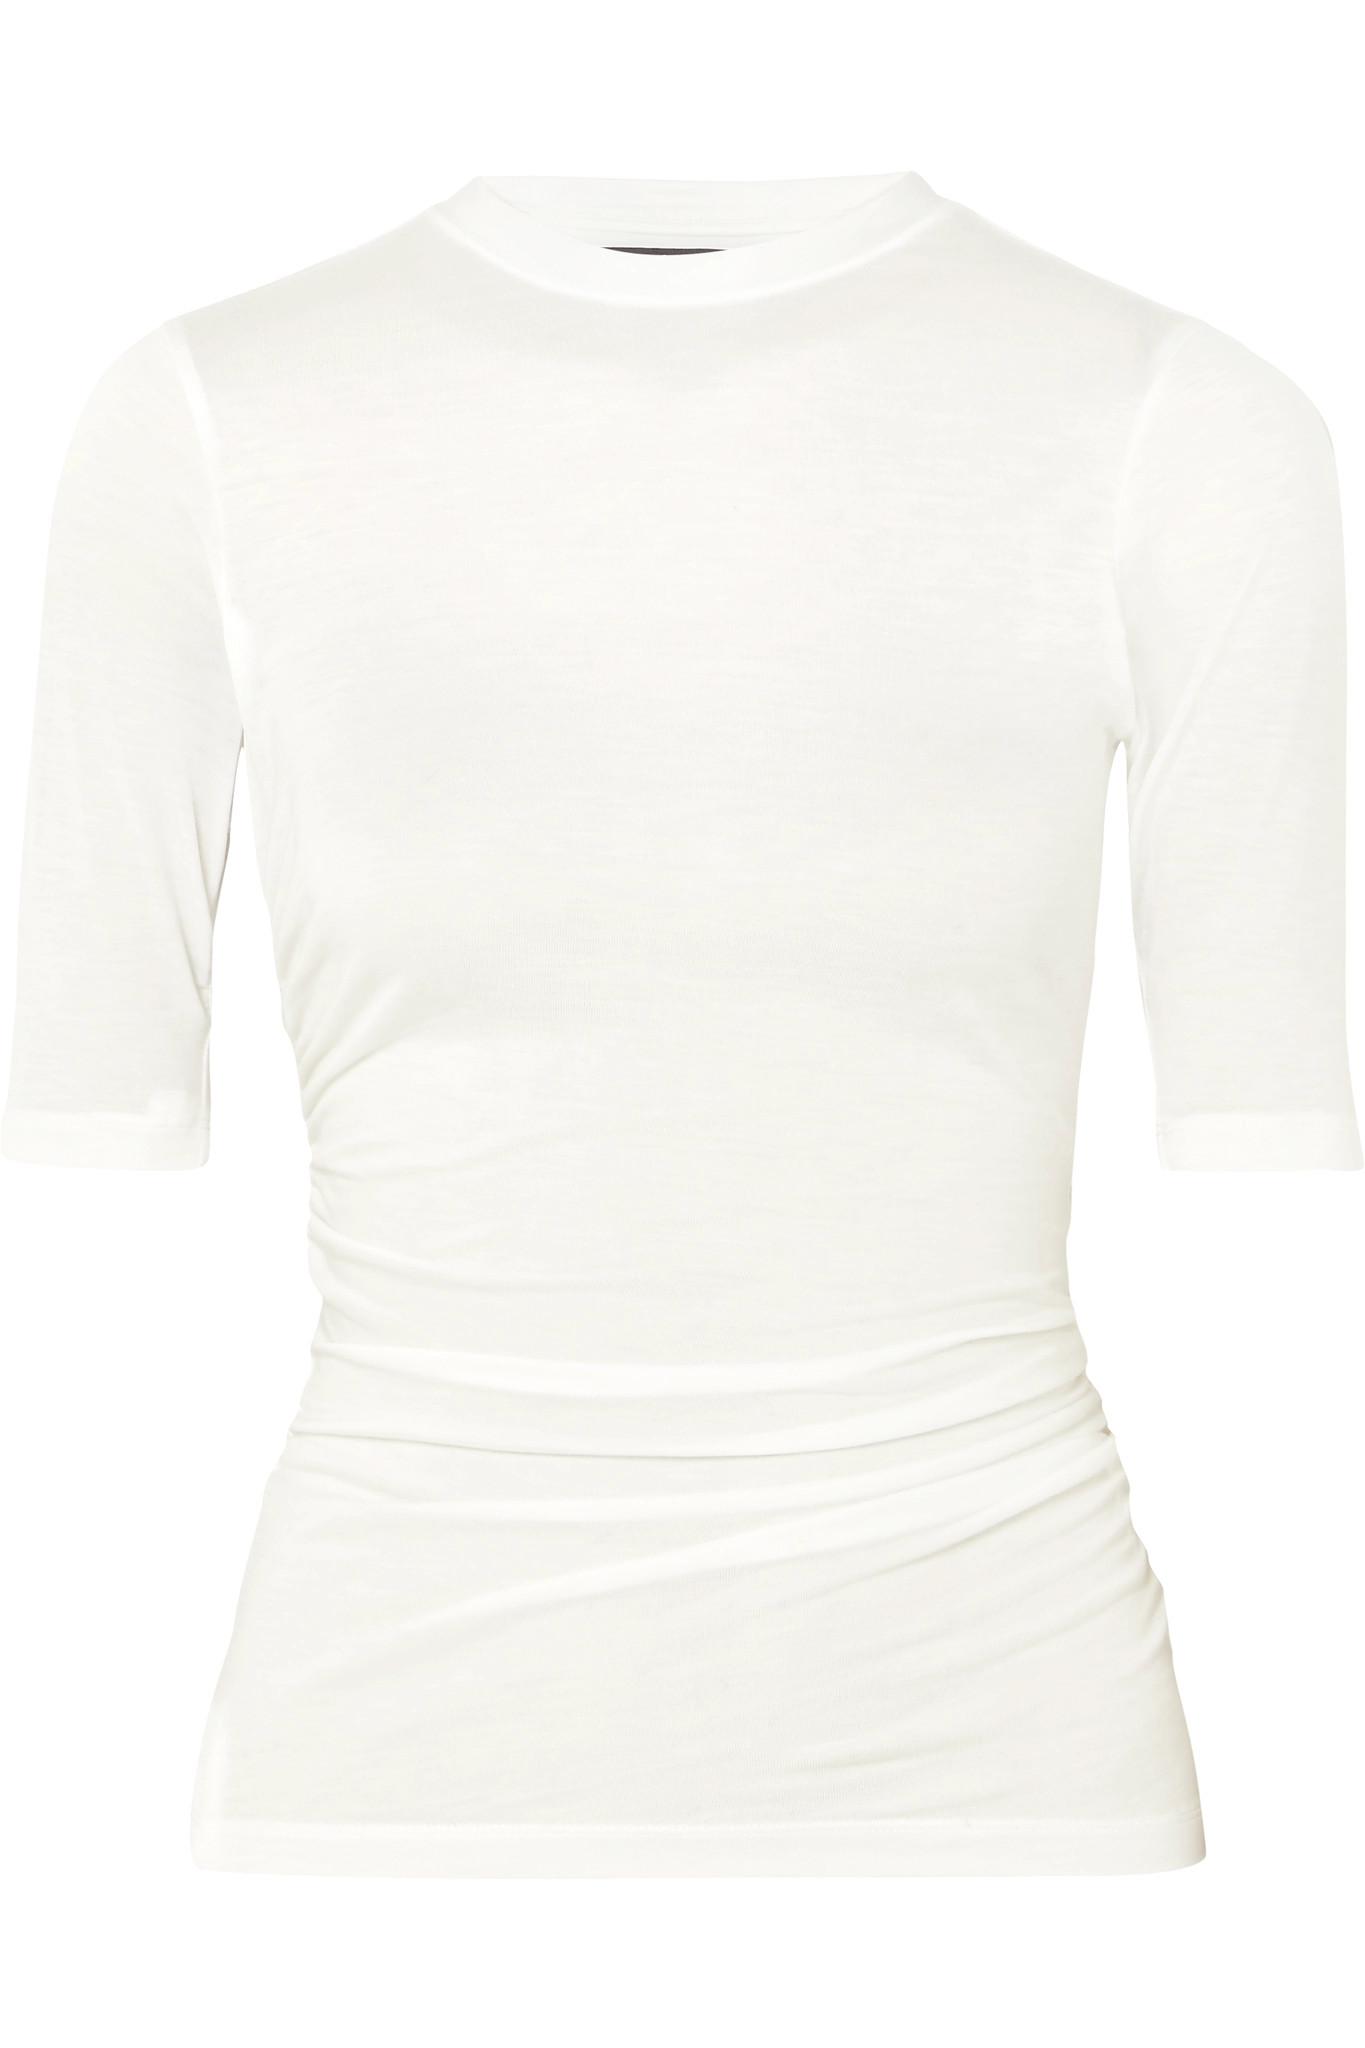 Jacquemus Denim Le Souk Ruched Jersey T-shirt in White | Lyst